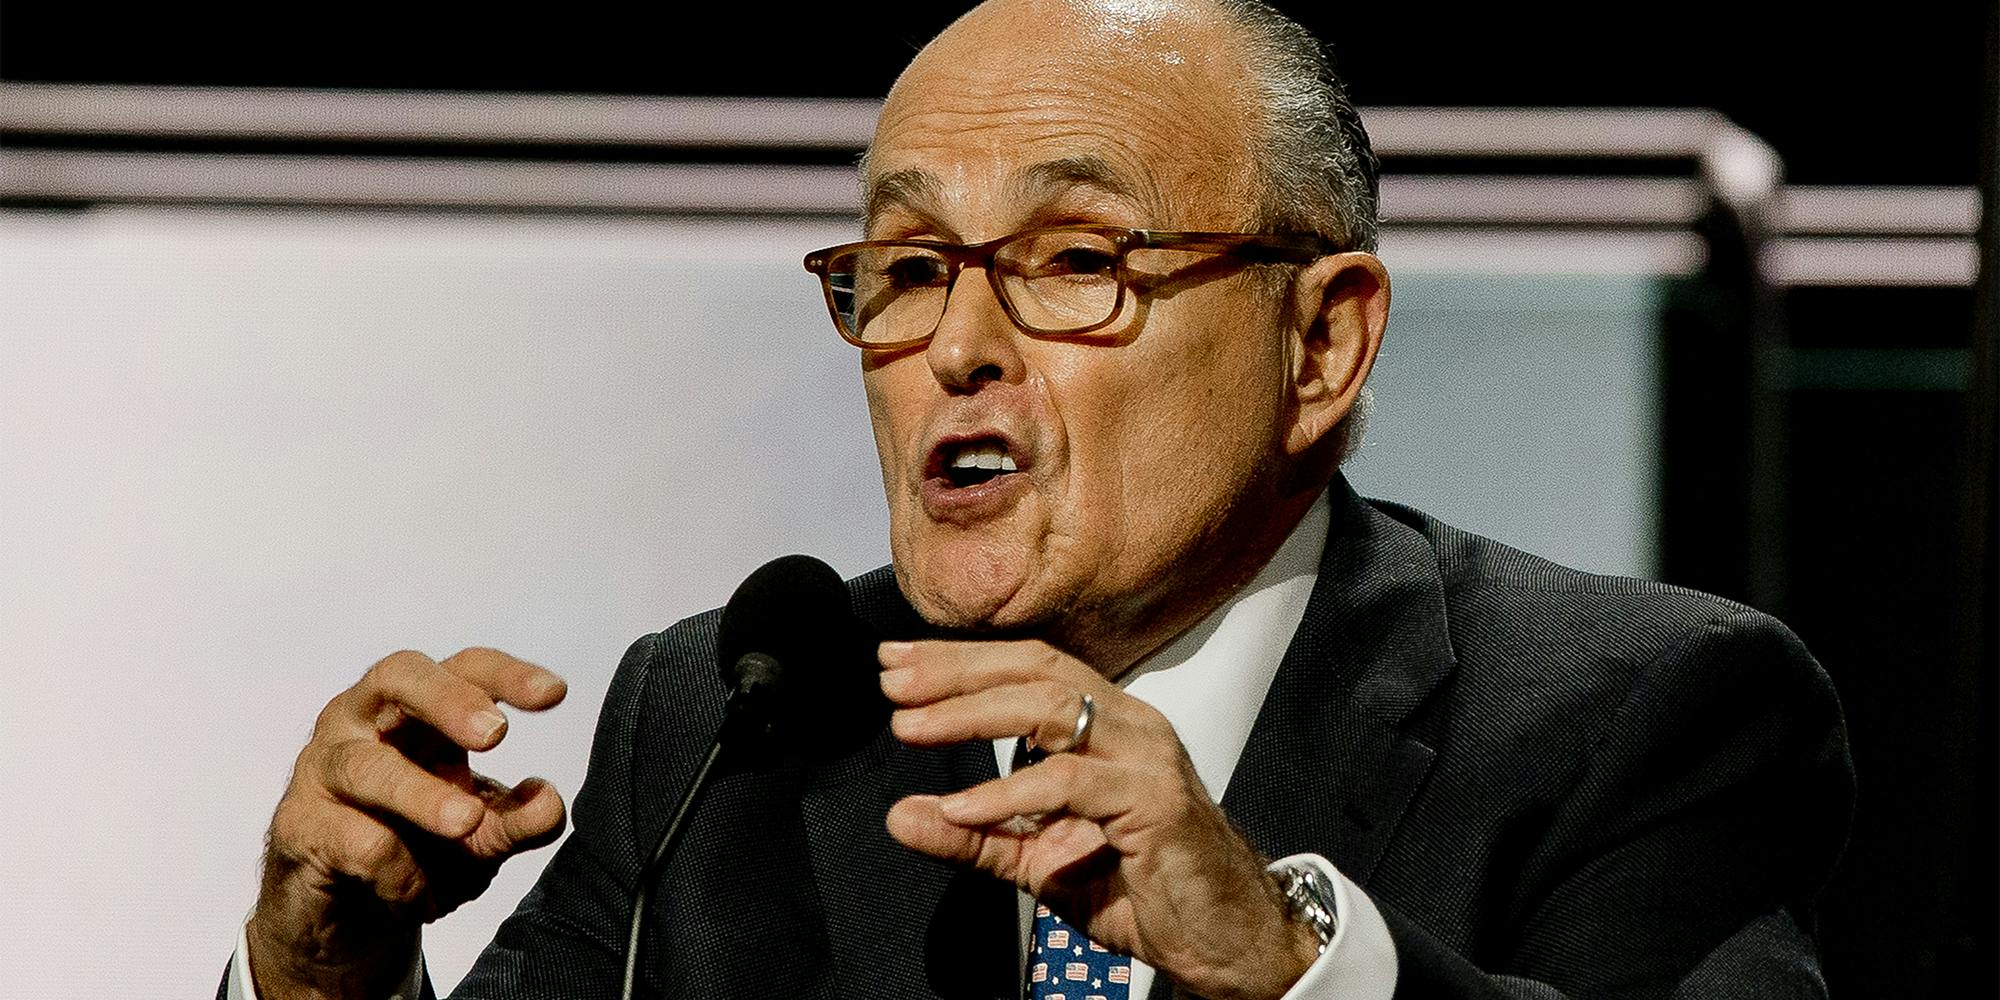 Rudy Giuliani Lawsuit: Comment on Penis Sizes Revealed